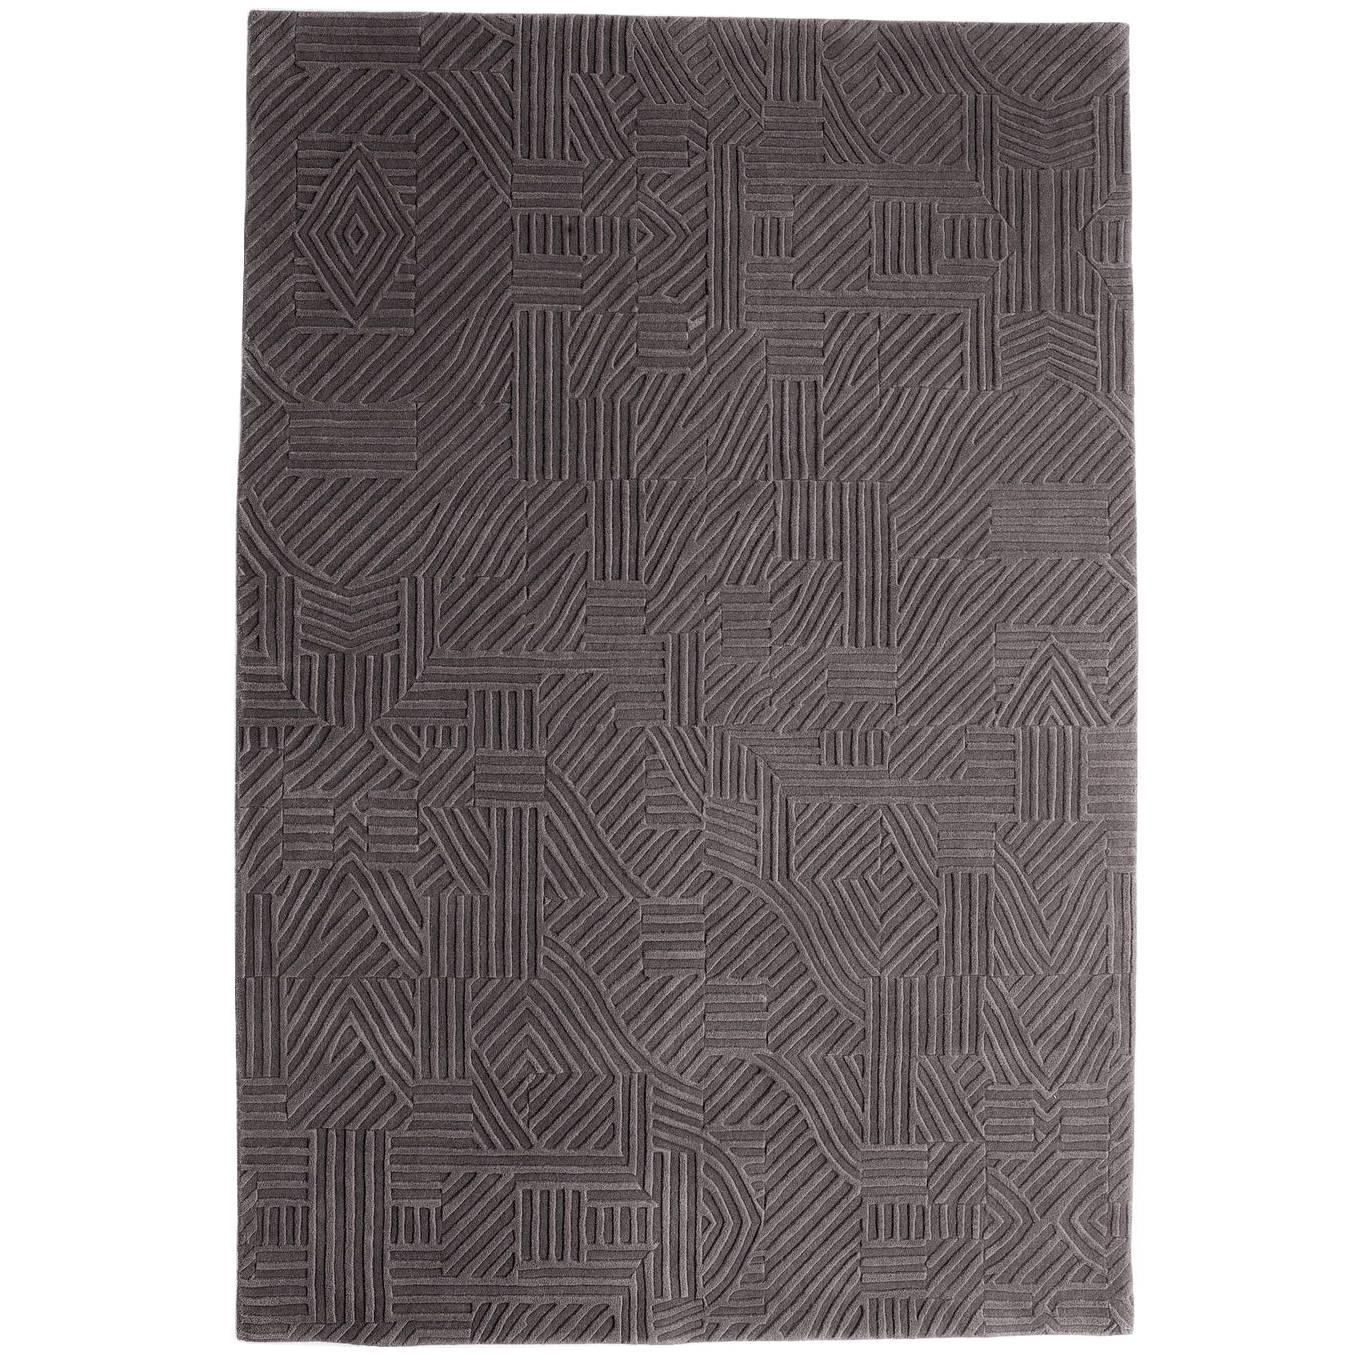 African Pattern Two Area Rug in Hand-Tufted Wool by Milton Glaser Large